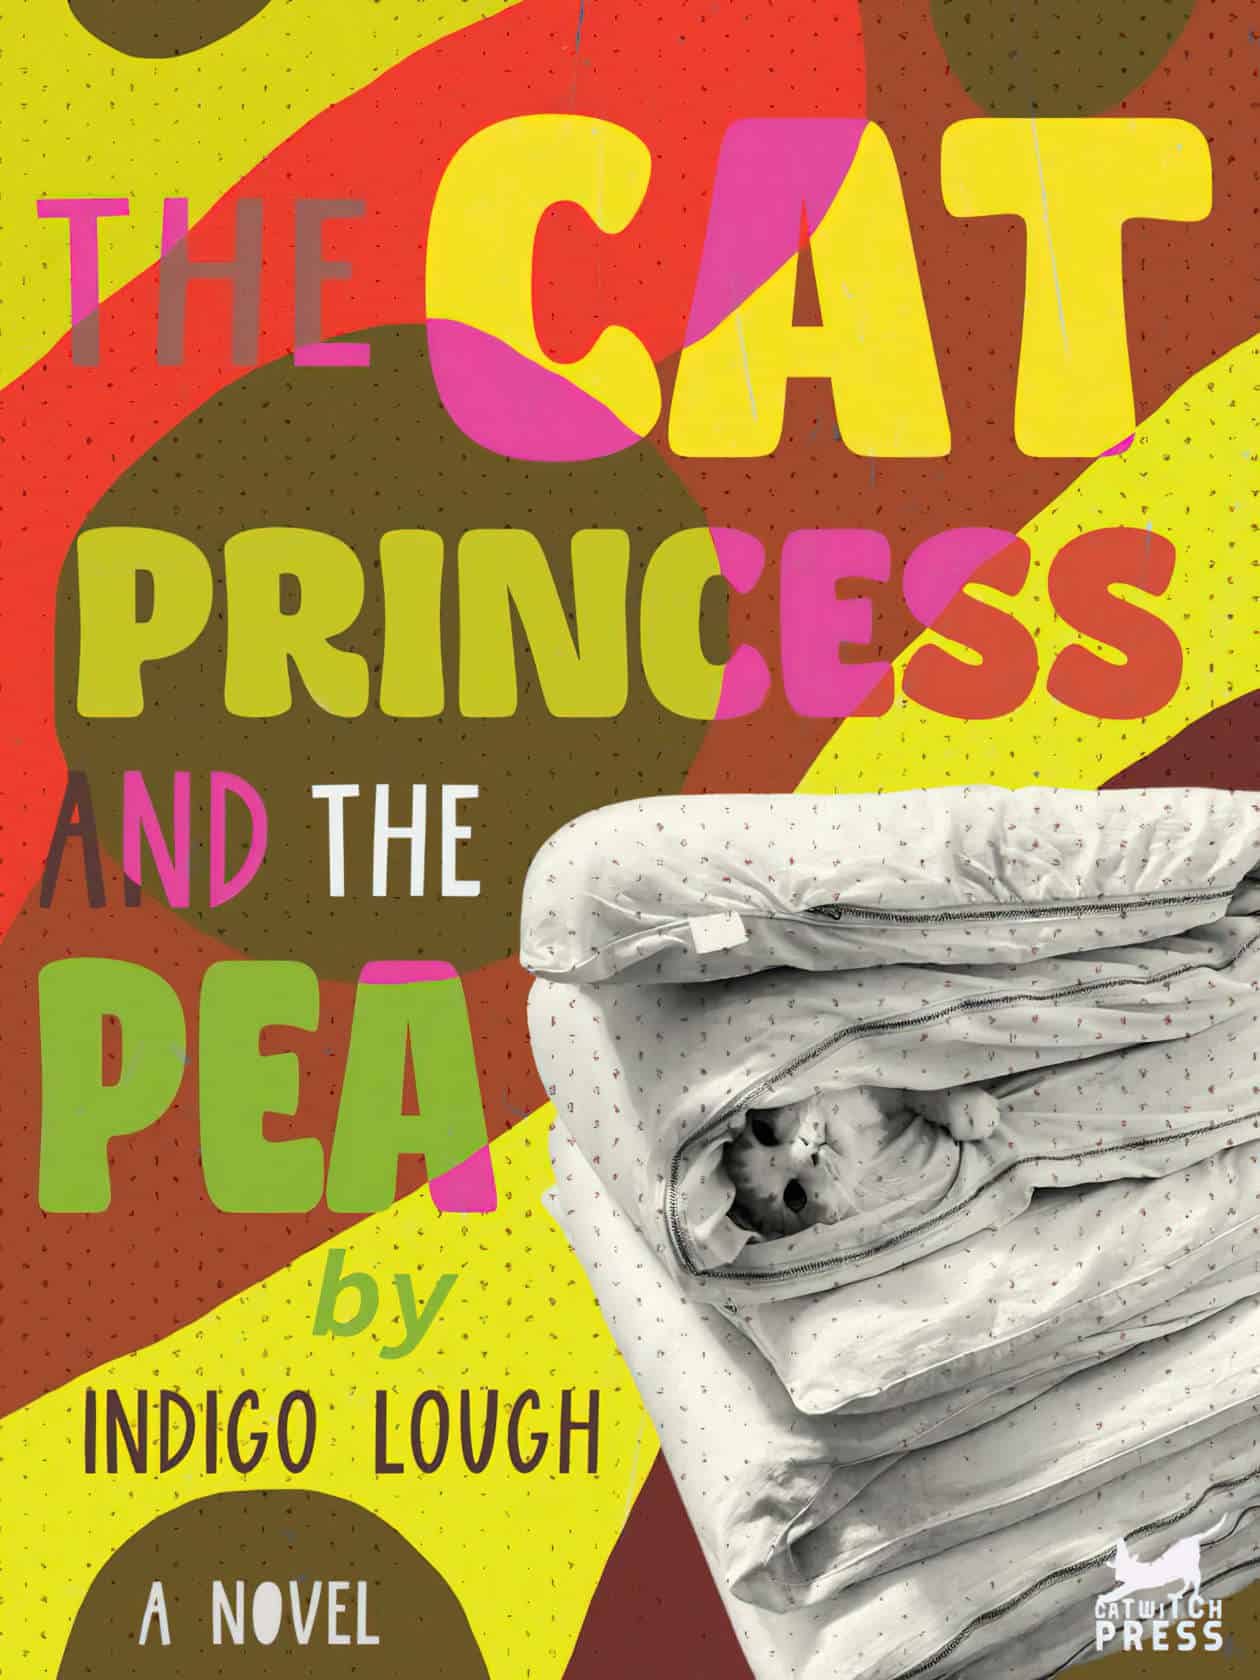 The Princess Cat and the Pea